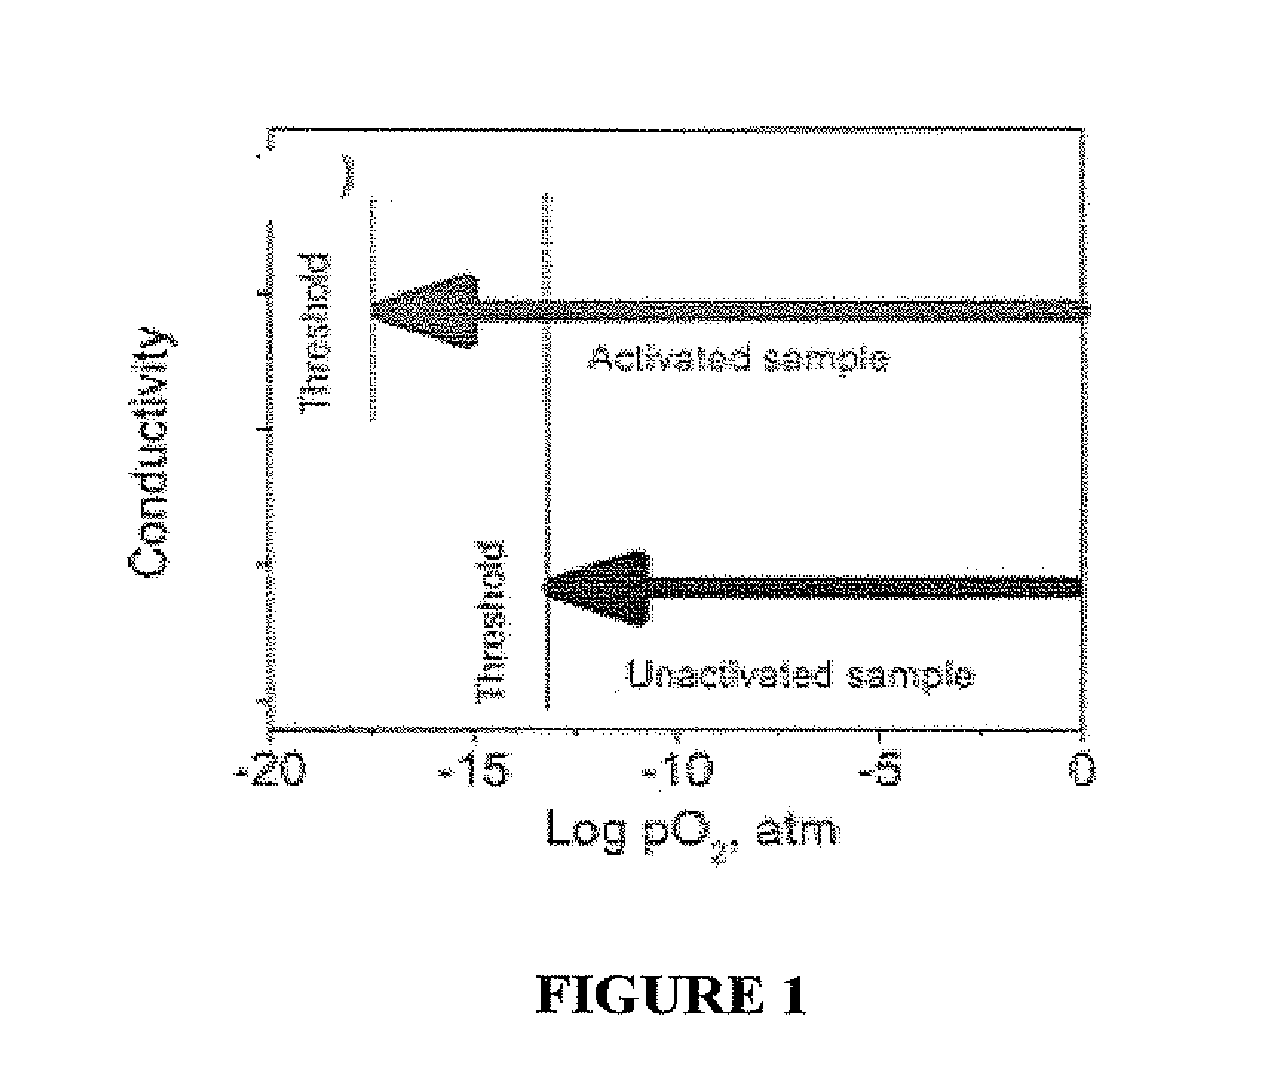 Photo-activation of solid oxide fuel cells and gas separation devices